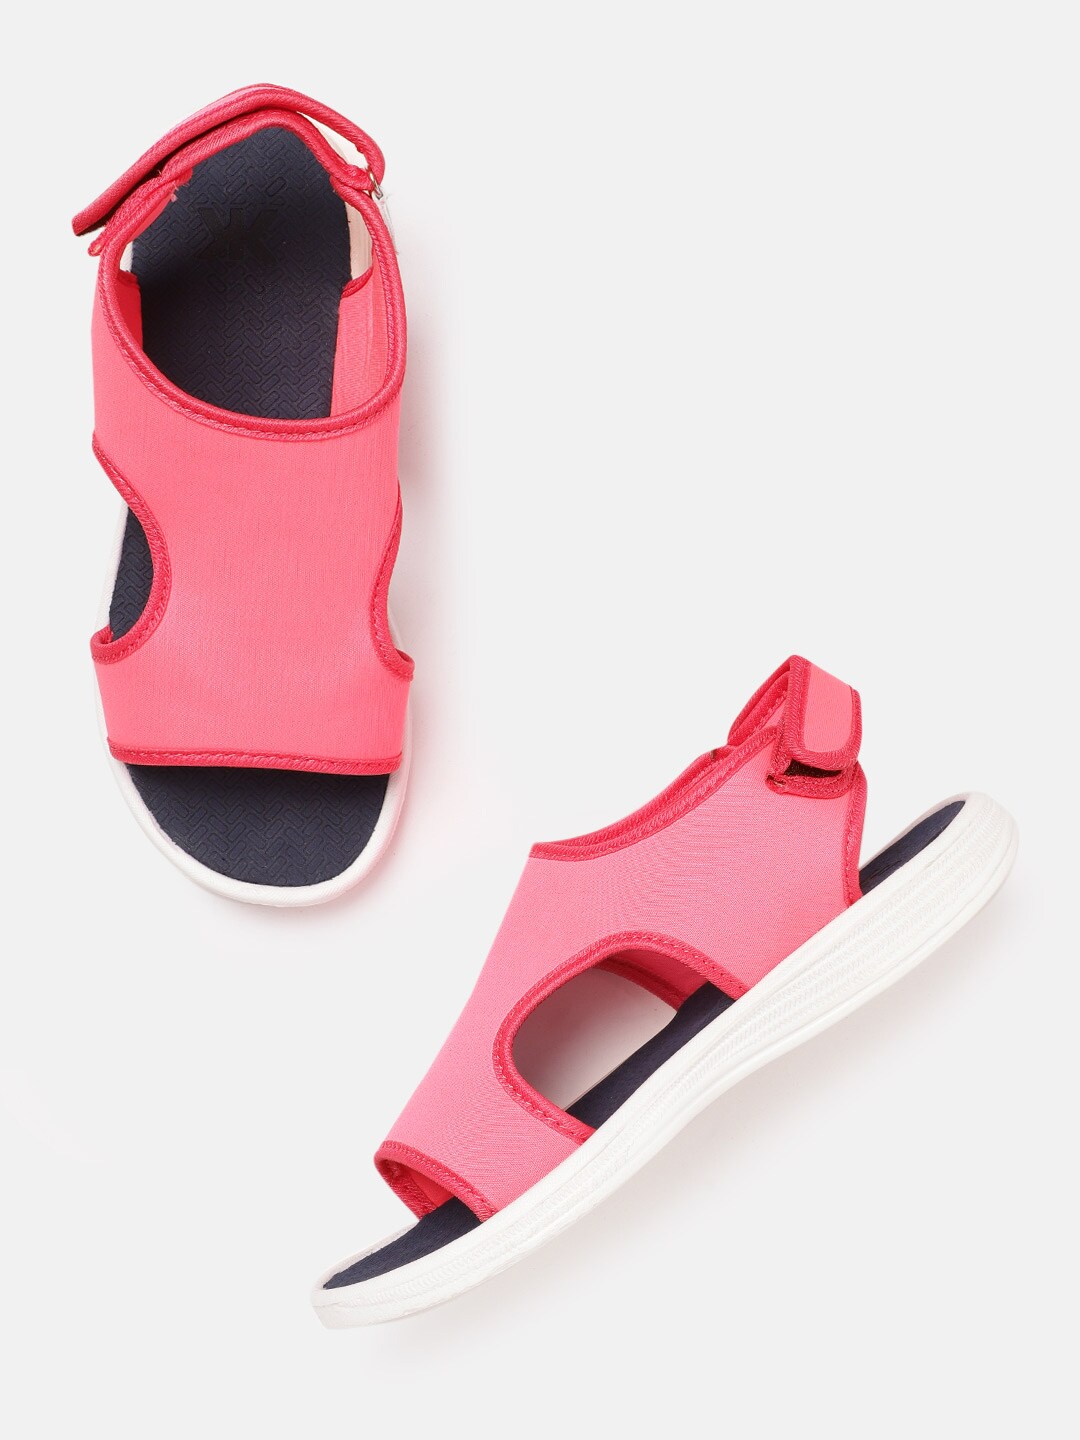 Kook N Keech Women Fluorescent Pink Solid Cut-Out Sports Sandals Price in India